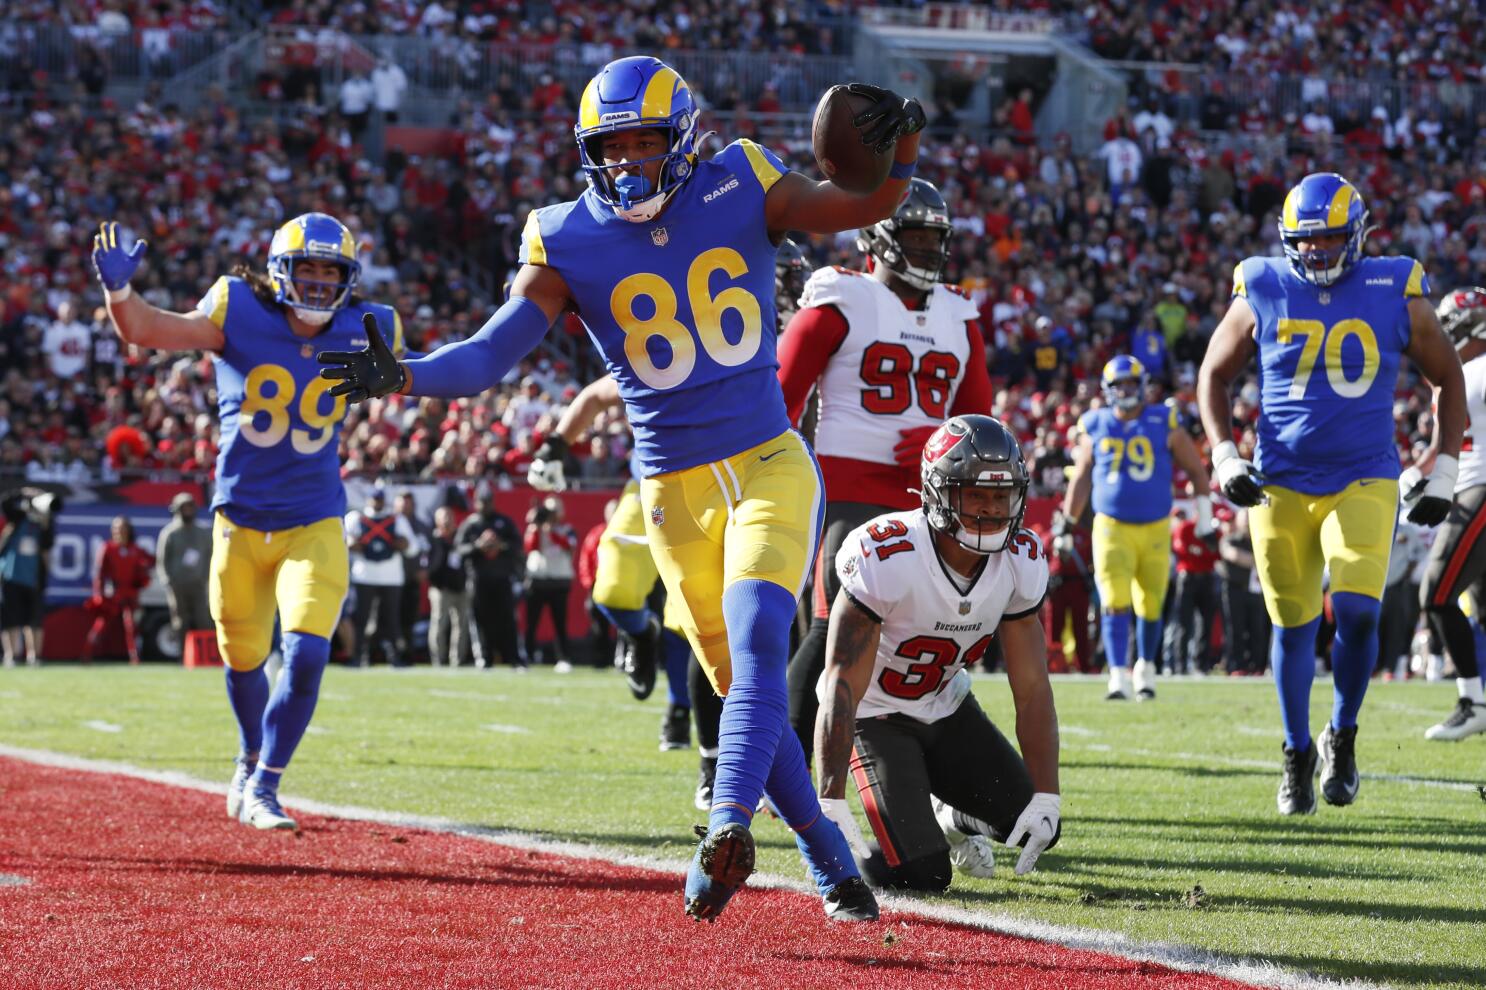 Los Angeles Rams tight end Kendall Blanton (86) breaks away against the San  Francisco 49ers during the NFL NFC Championship game, Sunday, Jan. 30, 2022  in Inglewood, Calif. The Rams defeated the